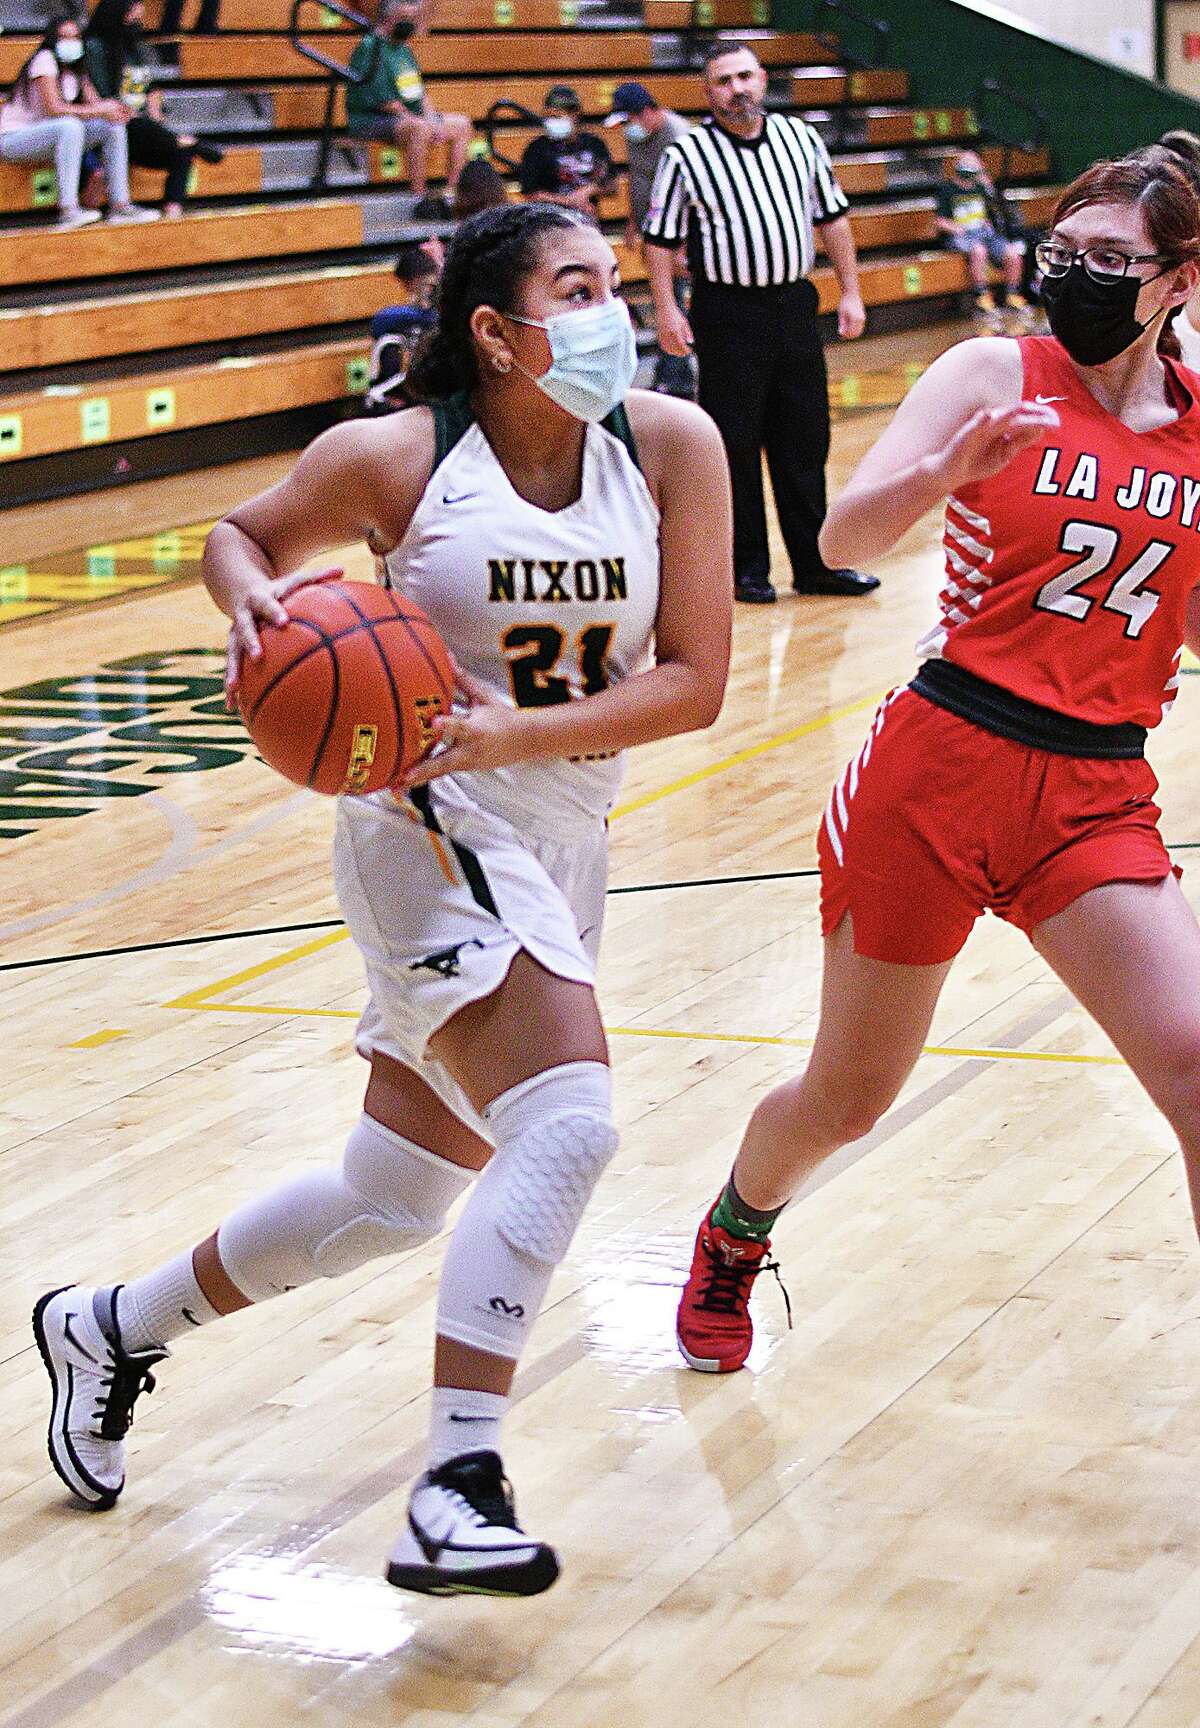 Carolina Manzo and Nixon host rival Martin at 6 p.m. in their final tune-up game before district play.